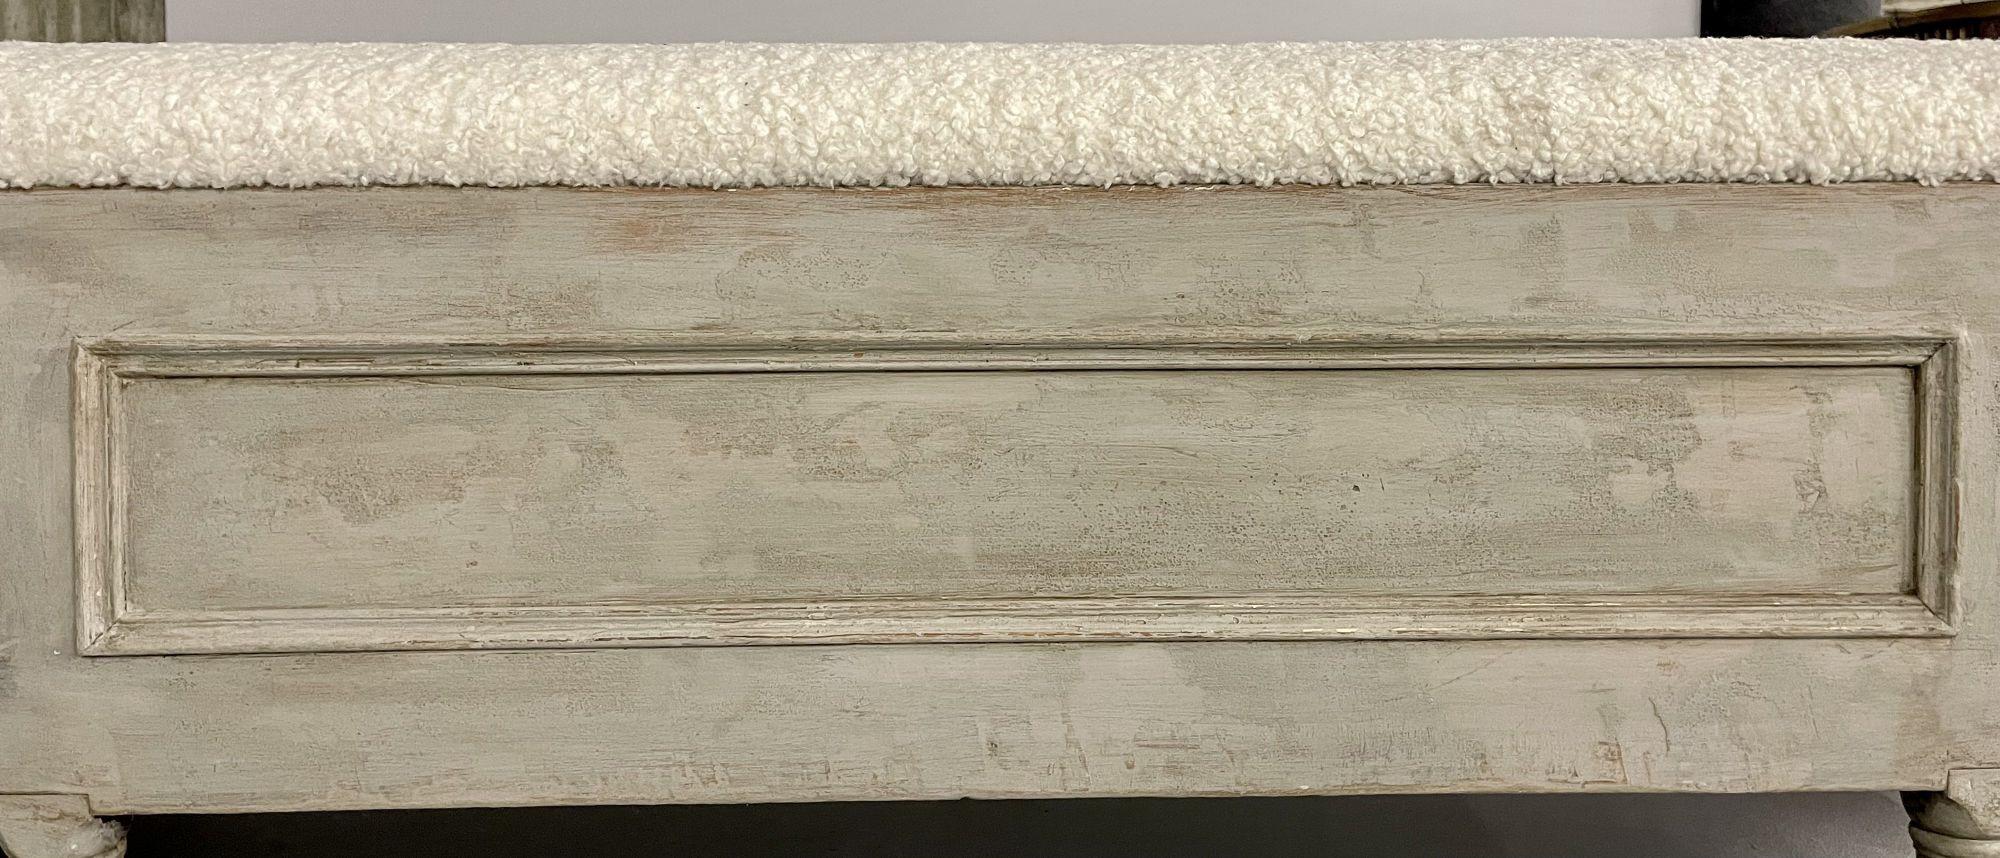 Gustavian Paint Decorated Storage Bench, New Wool Shearling, Sweden, 19th C. For Sale 11